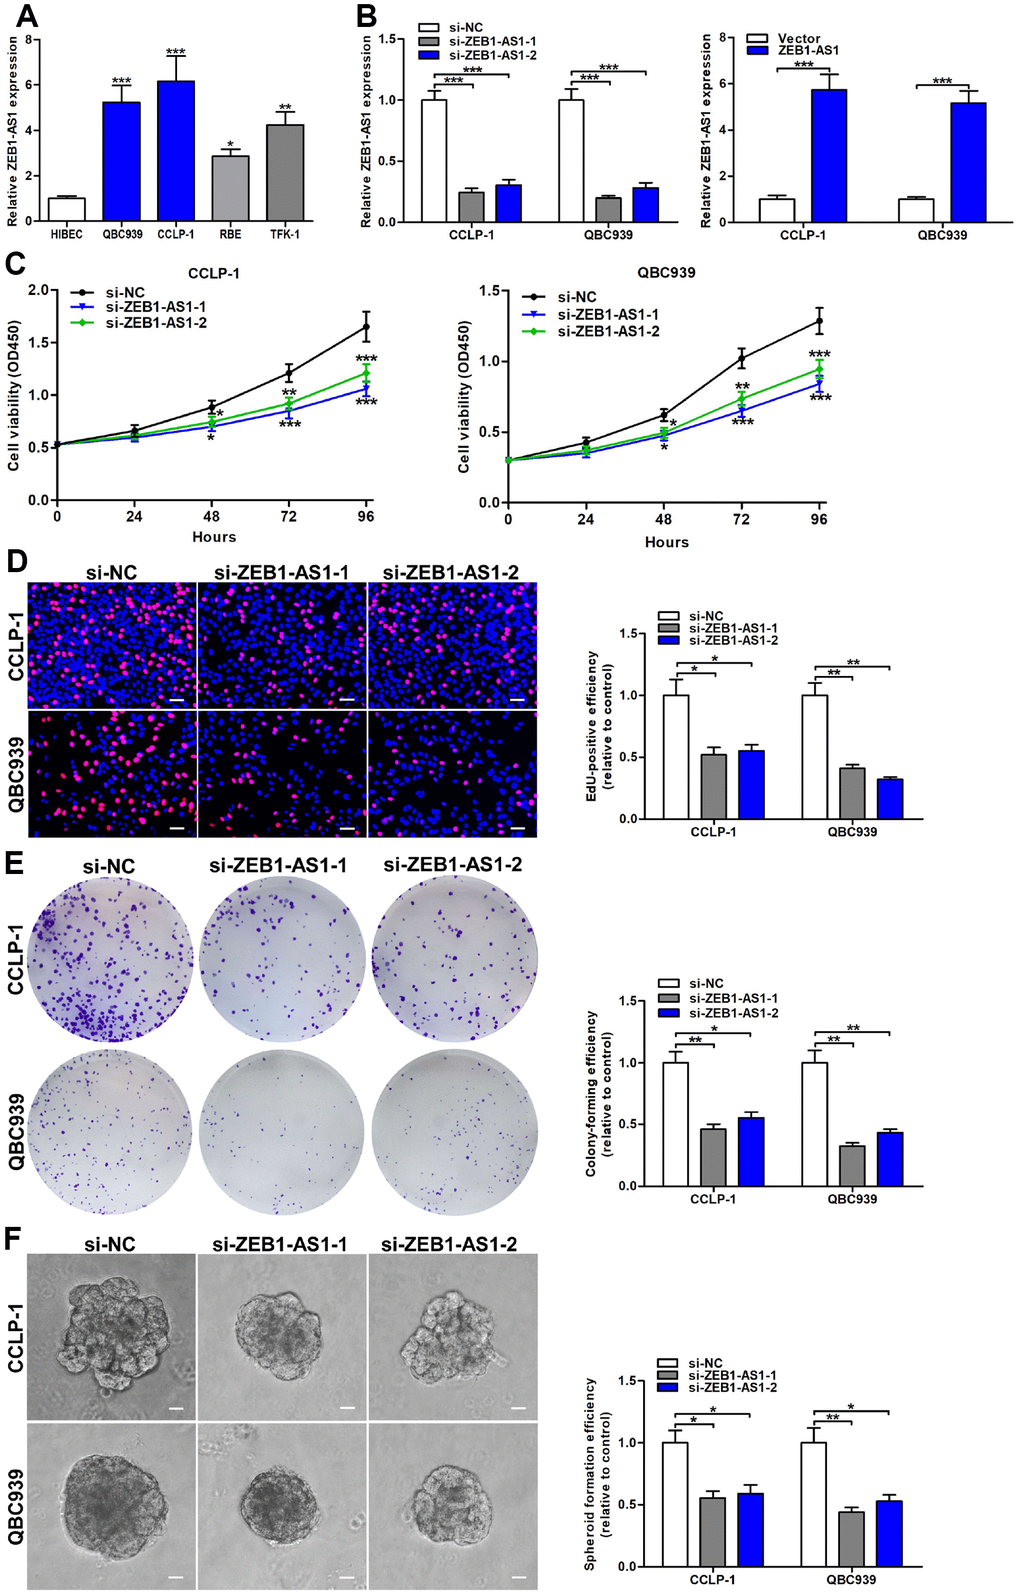 Increased ZEB1-AS1 facilitated the viability and stemness of CCA cells. (A) The expression of ZEB1-AS1 in CCA QBC939, CCLP-1, RBE, TFK-1 cells and normal HIBEC. (B) The knockdown efficiencies of si-ZEB1-AS1-1 and si-ZEB1-AS1-2 as well as amplification efficiency of pcDNA3.1-ZEB1-AS1 were monitored through qRT-PCR. (C) CCK-8 proliferation curves were drawn to show the effect of ZEB1-AS1 on cellular proliferation. (D) The red stains representing proliferative activity were reduced in QBC939 and CCLP-1 cells transfected with si-ZEB1-AS1-1 and si-ZEB1-AS1-2. (E) The cell colonies were decreased in si-ZEB1-AS1 cells revealed by colony formation assays. (F) Spheroid forming abilities of QBC939 and CCLP-1 cells transfected with si-ZEB1-AS1-1 and si-ZEB1-AS1-2 were restrained. *P **P ***P 